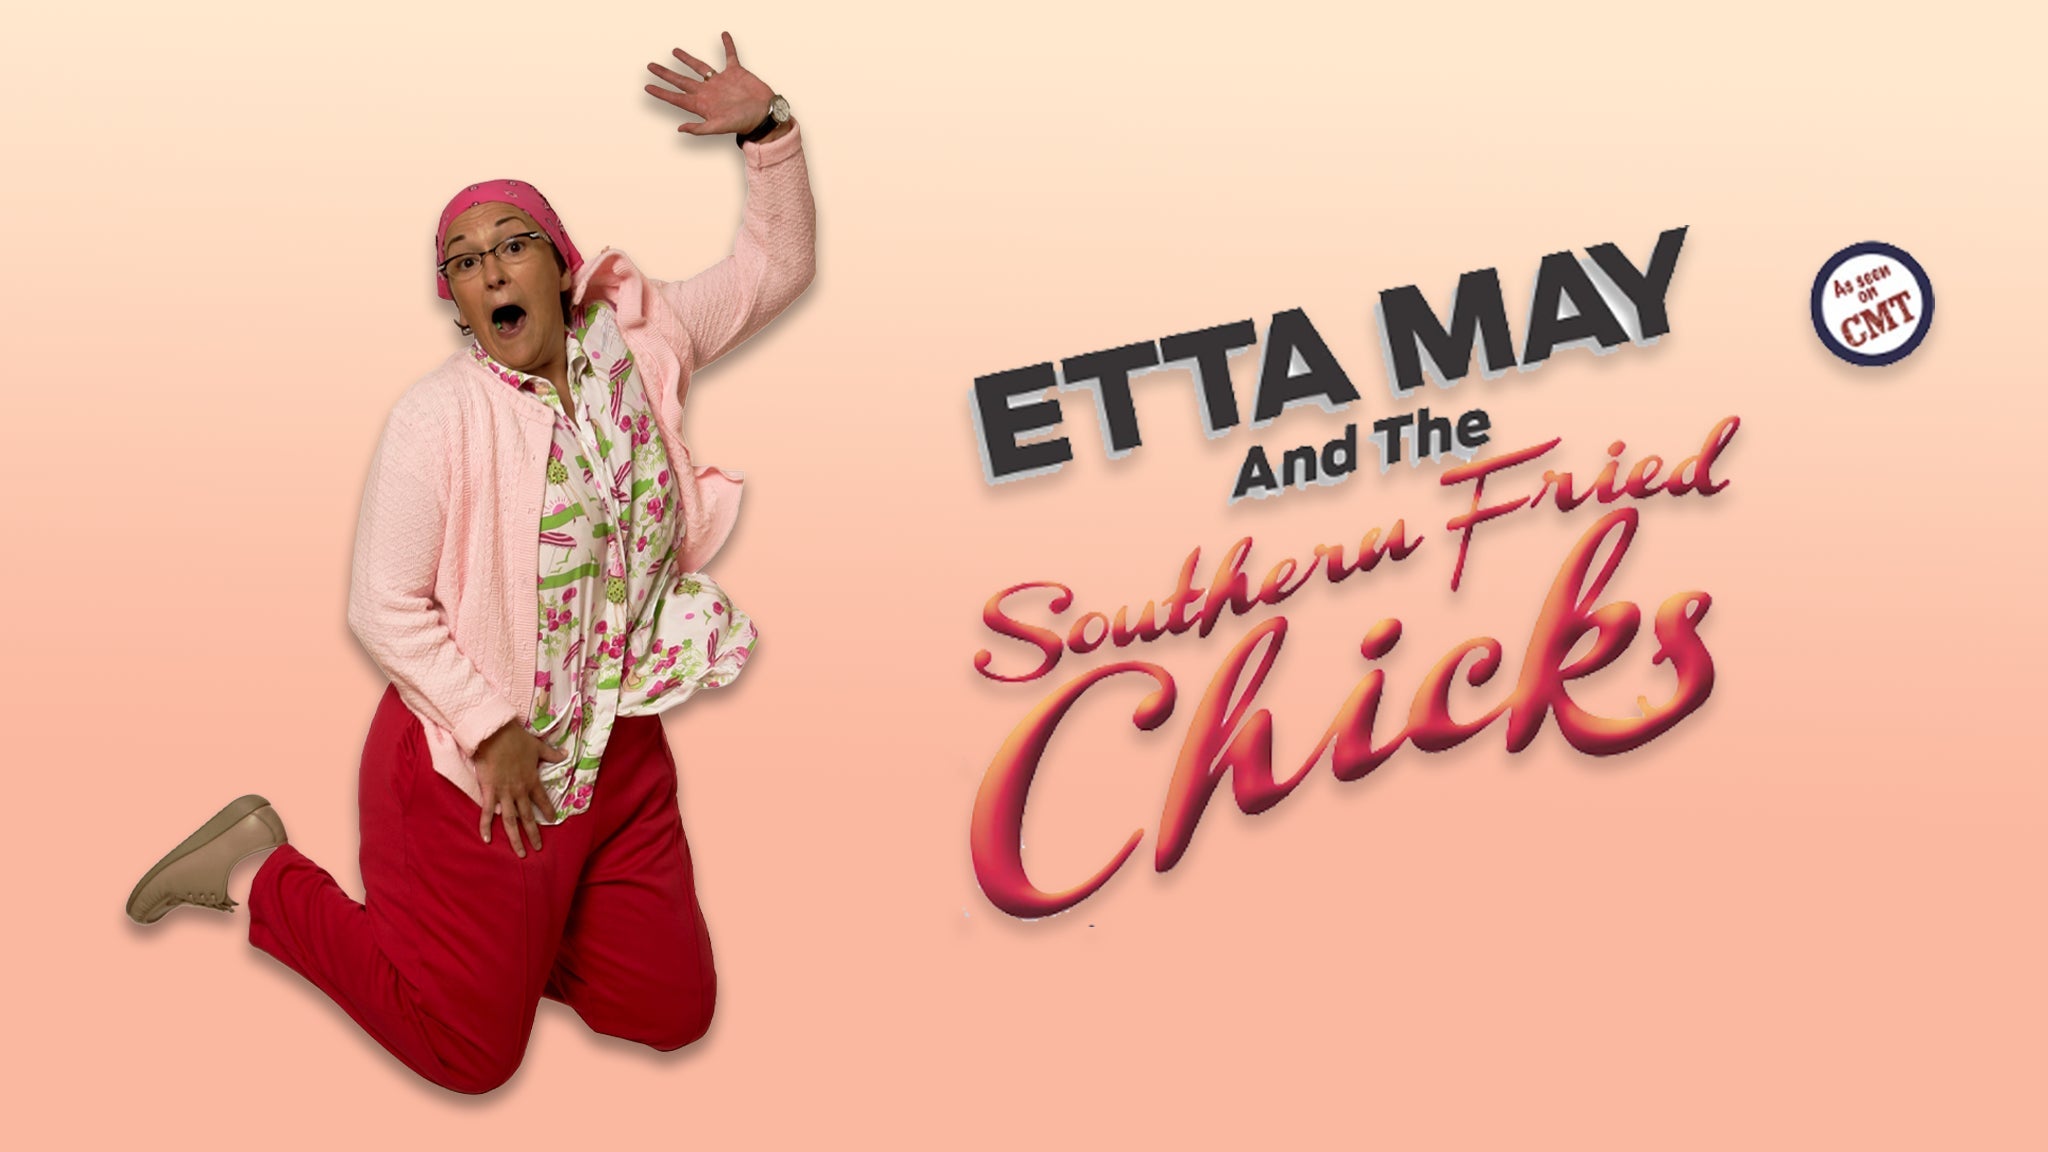 accurate presale passcode for Etta May & The Southern Fried Chicks presale tickets in Anderson at Paramount Theatre